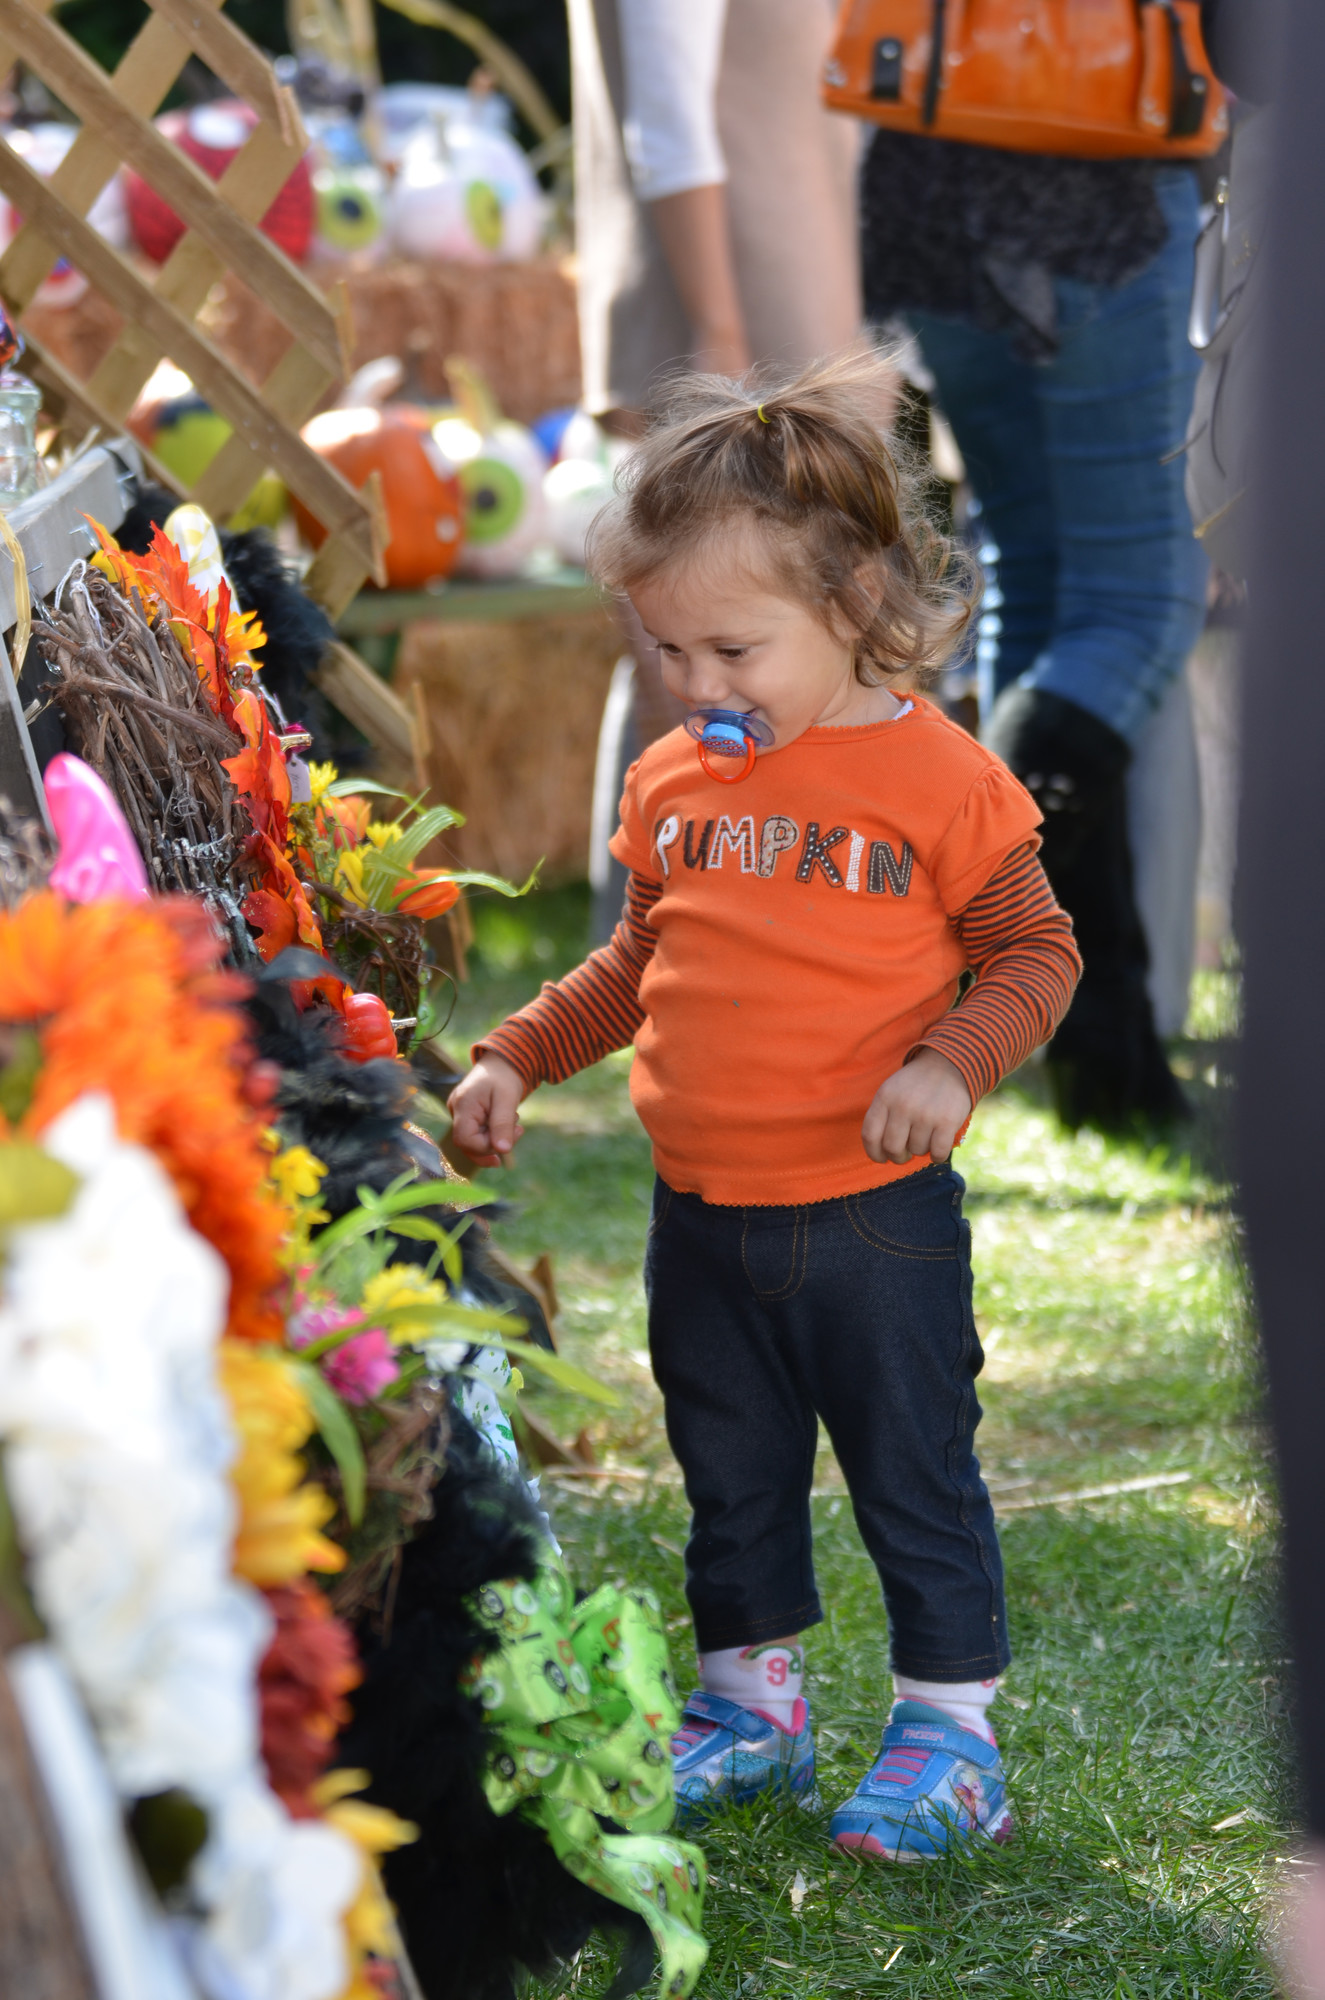 Demi Ioannou, 20 months old, was excited to look at everything at the Garden Potpourri.